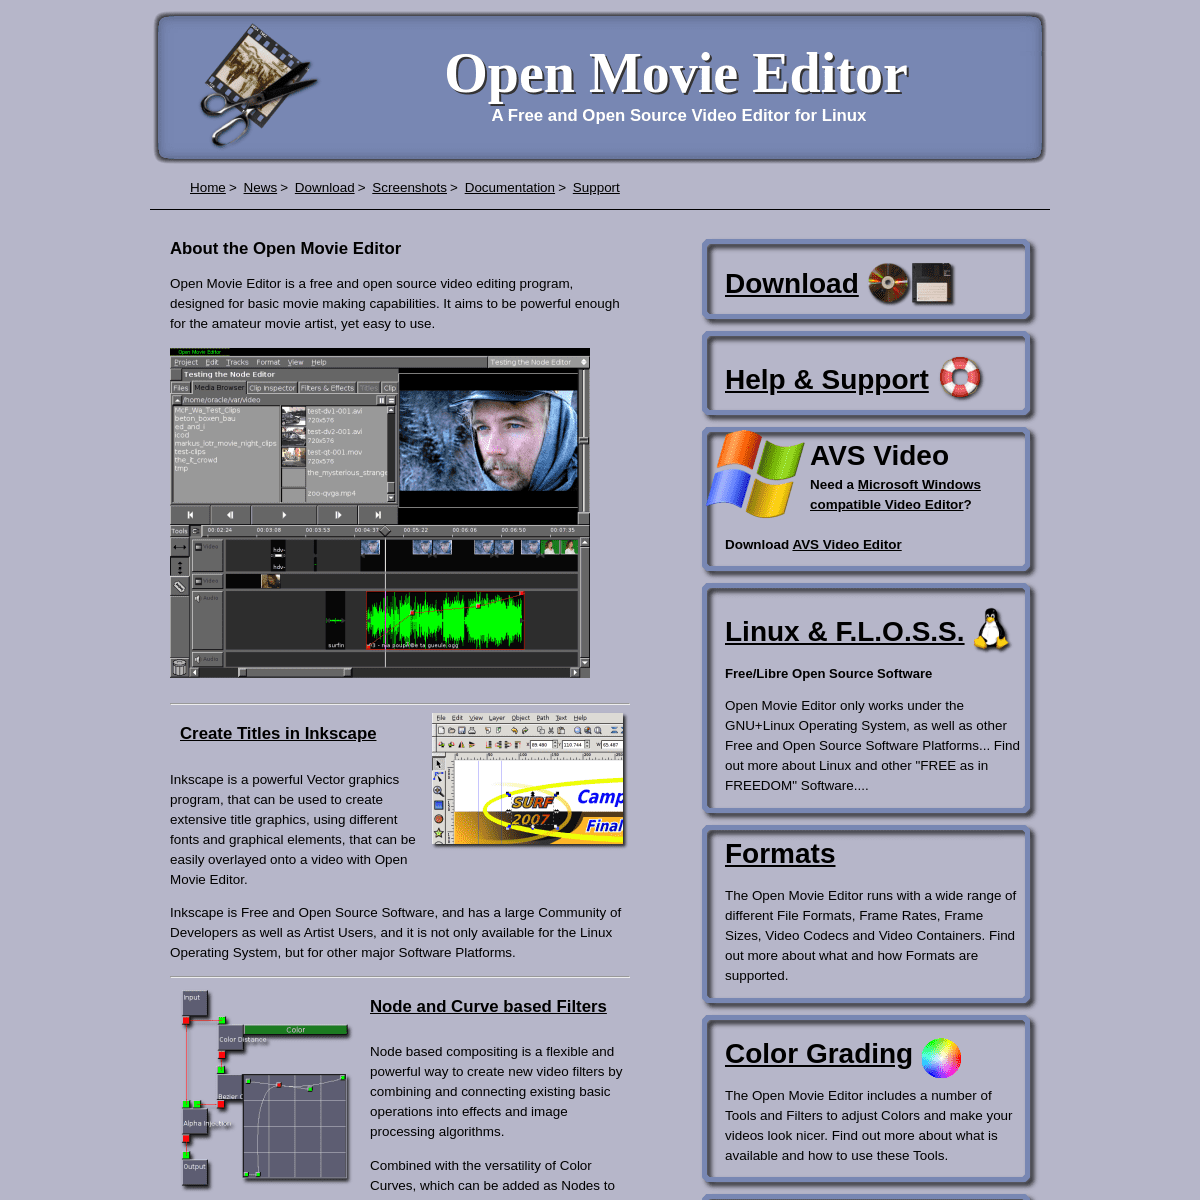 A complete backup of openmovieeditor.org